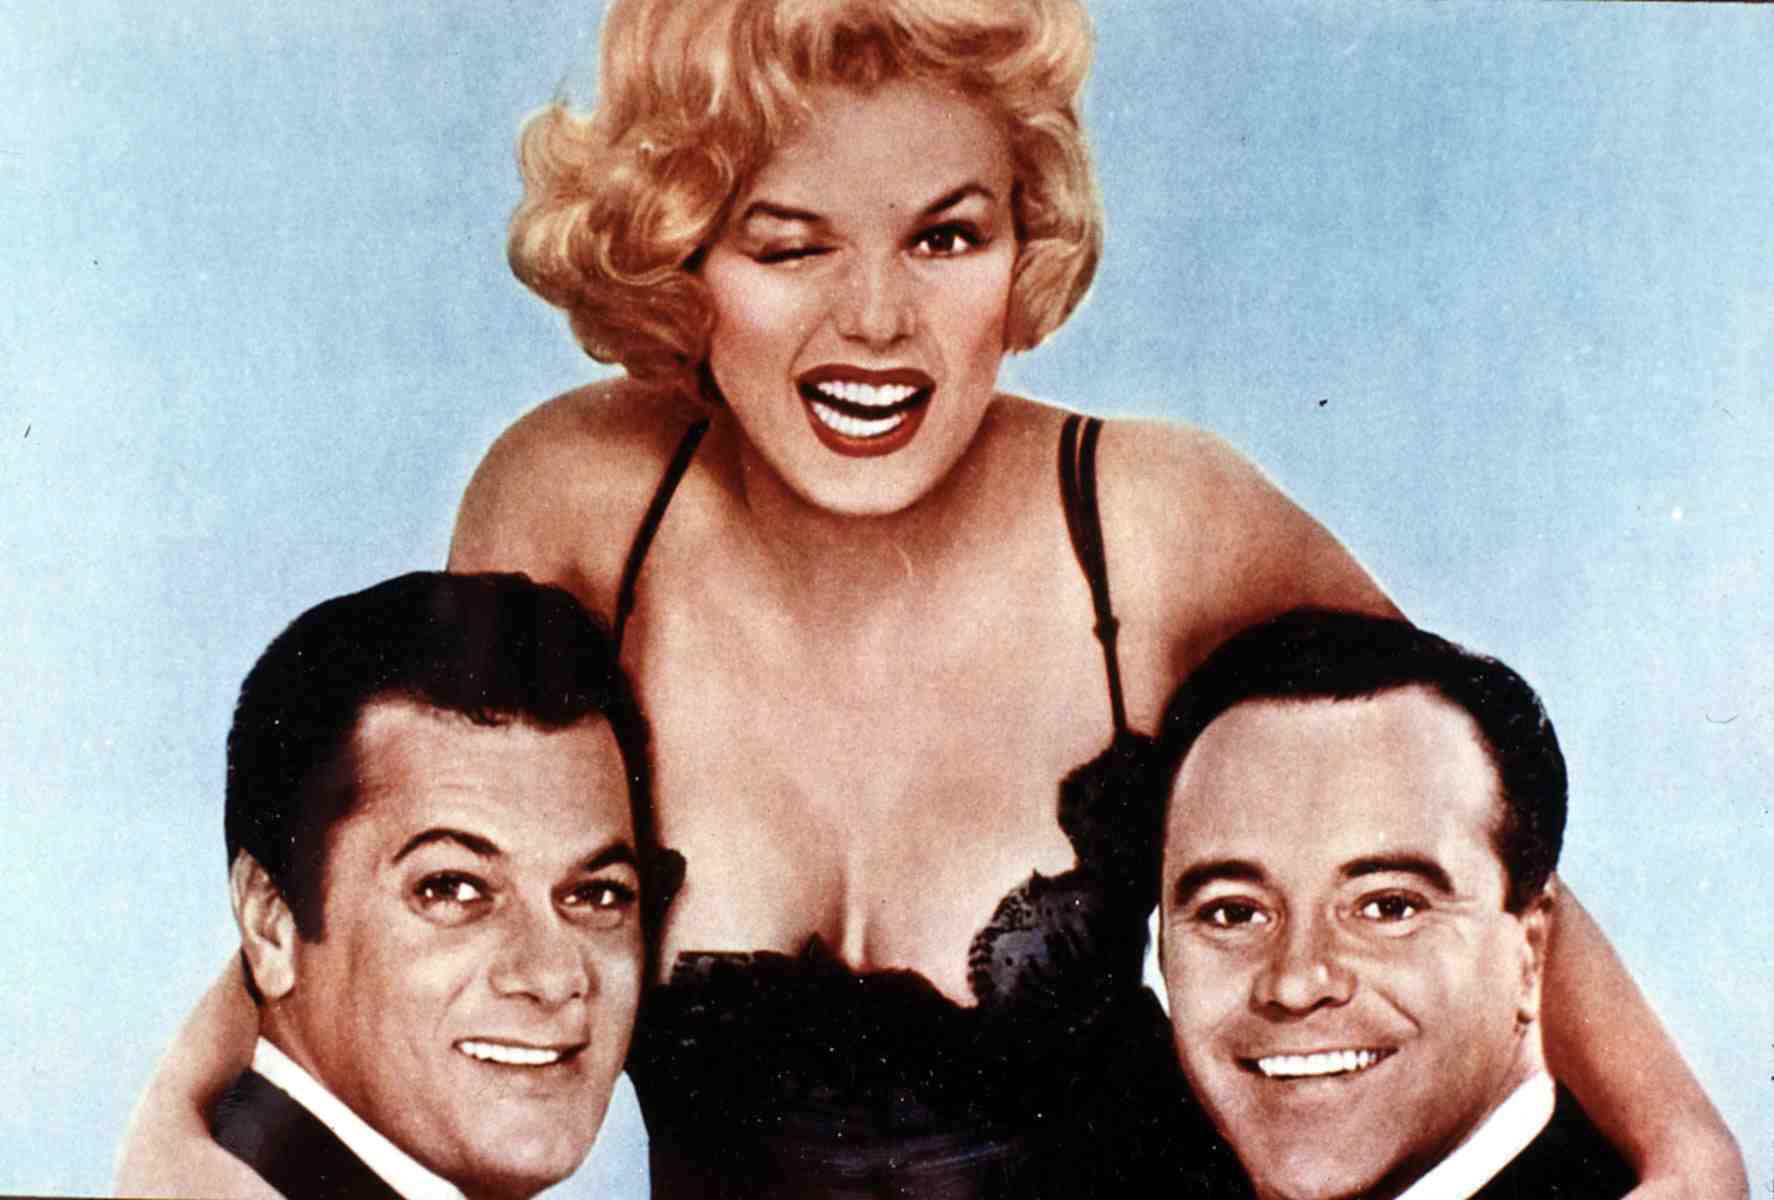 Tony Curtis, Marilyn Monroe, Jack Lemmon in promotional shots for 'Some Like it Hot'